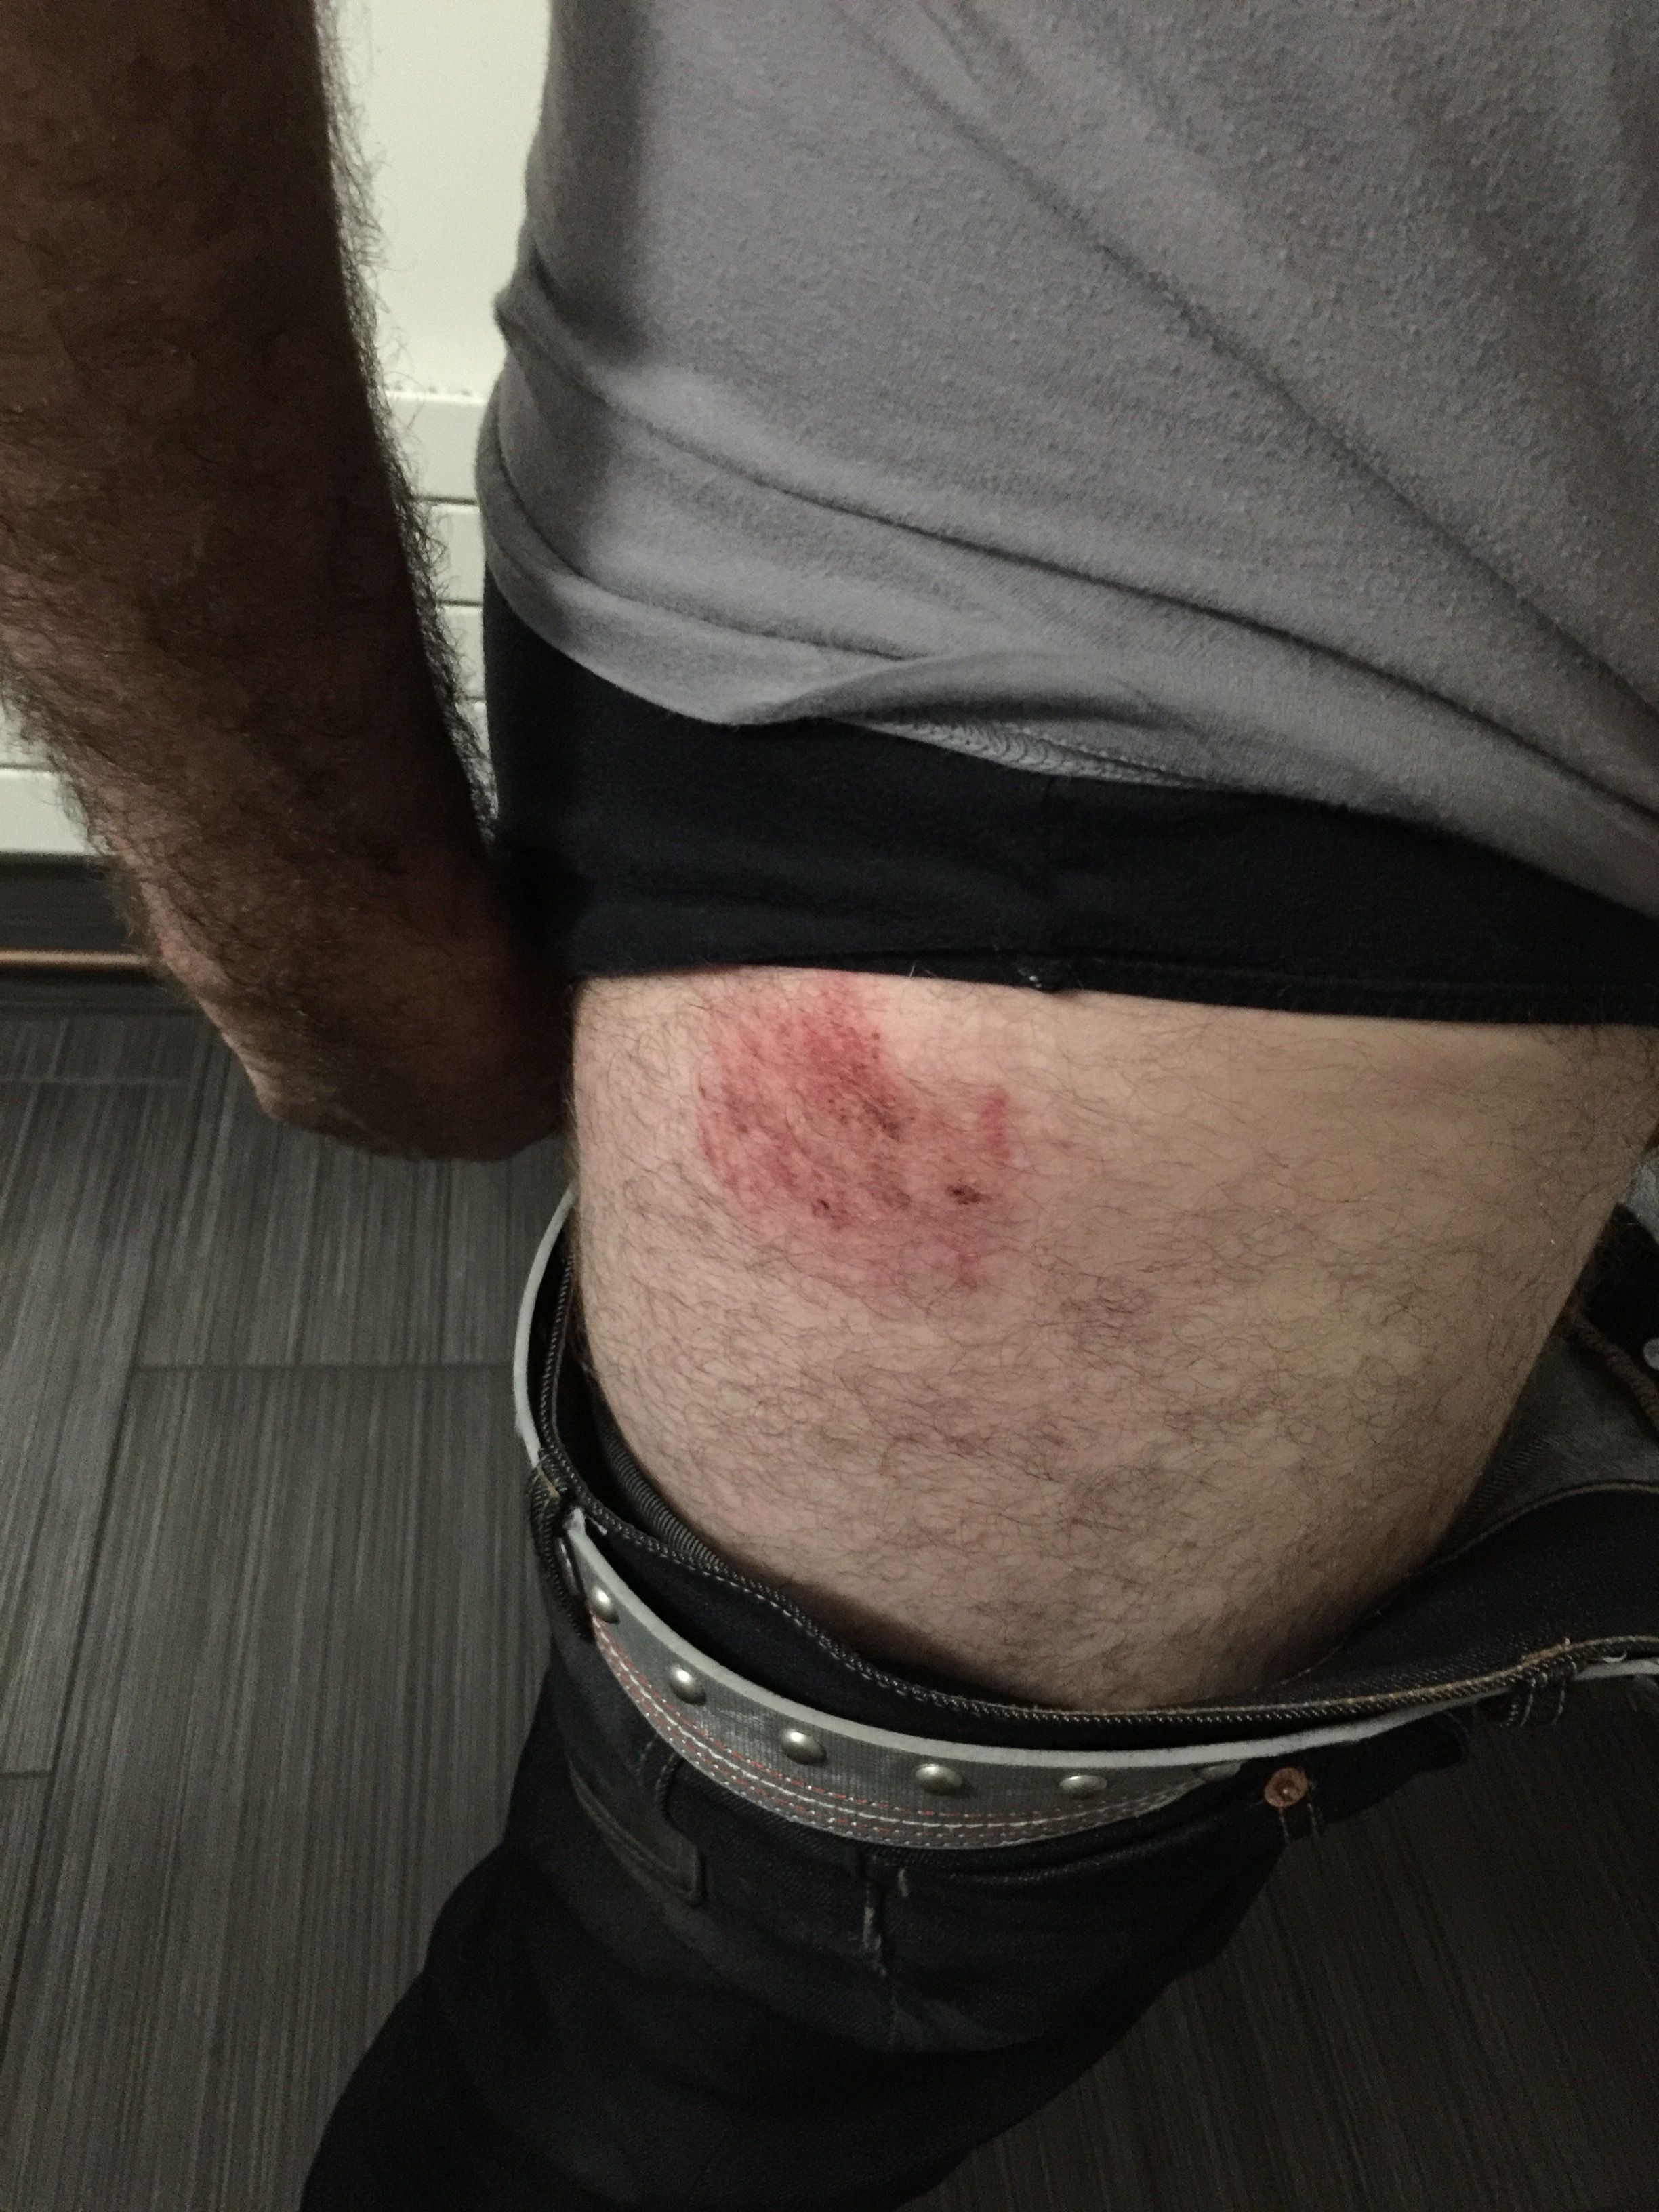 This is the road rash I got with the slightest crash, not bad, but I need Kevlar